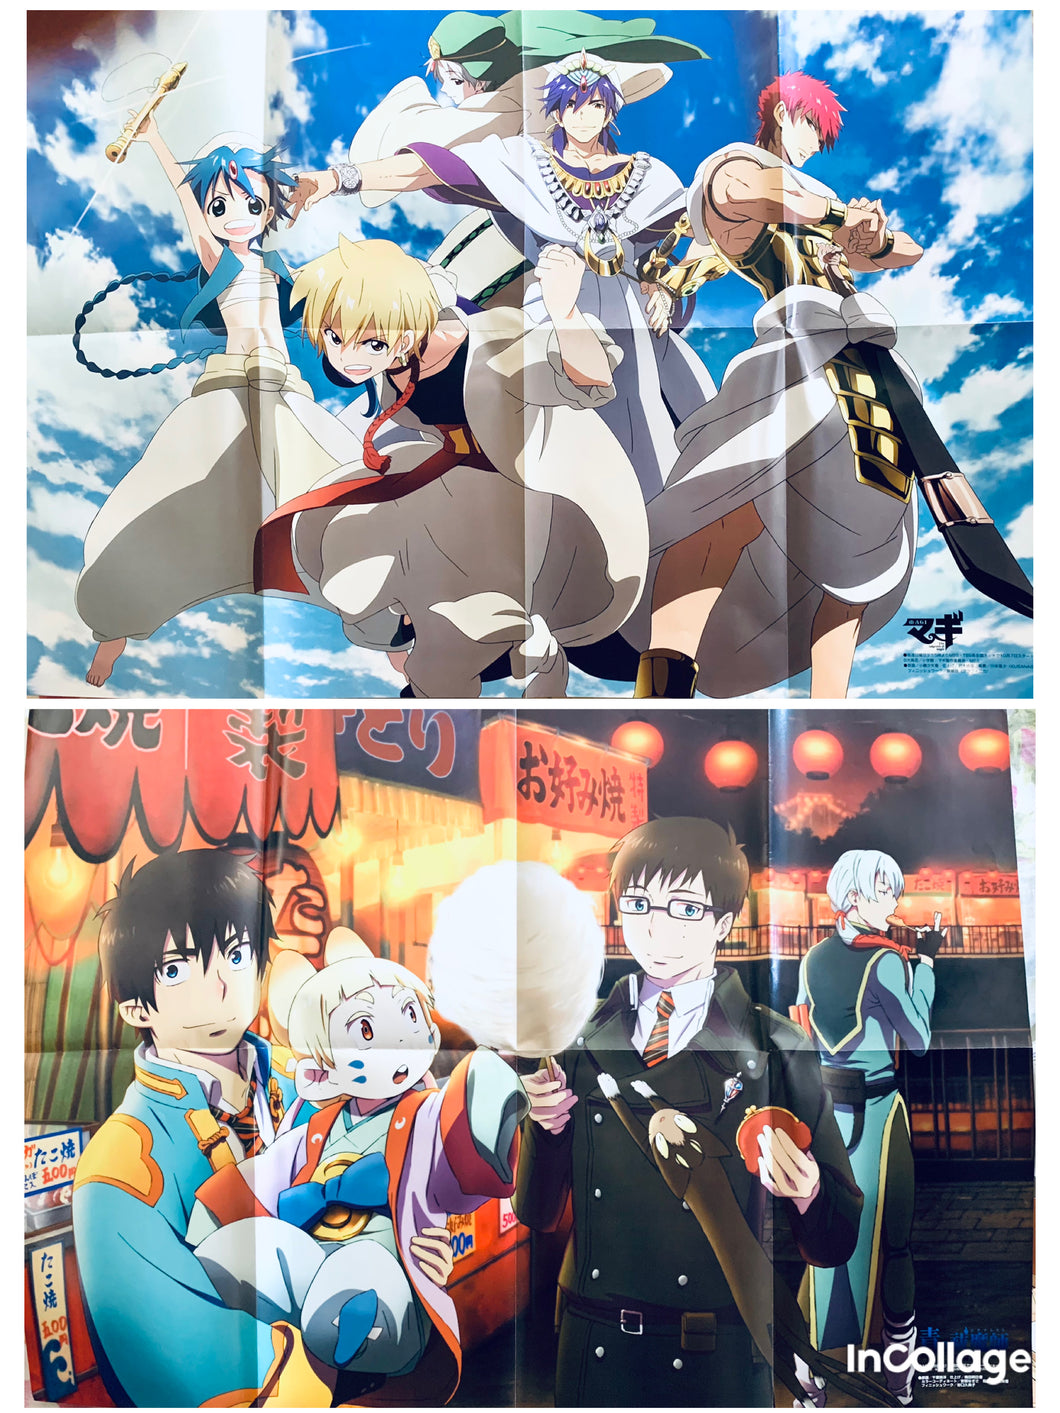 Magi - The Labyrinth of Magic / Blue Exorcist The Movie - B2 Double-sided Special Poster (Yatsuori) - Animedia October 2012 Separate Vol. 2 Appendix